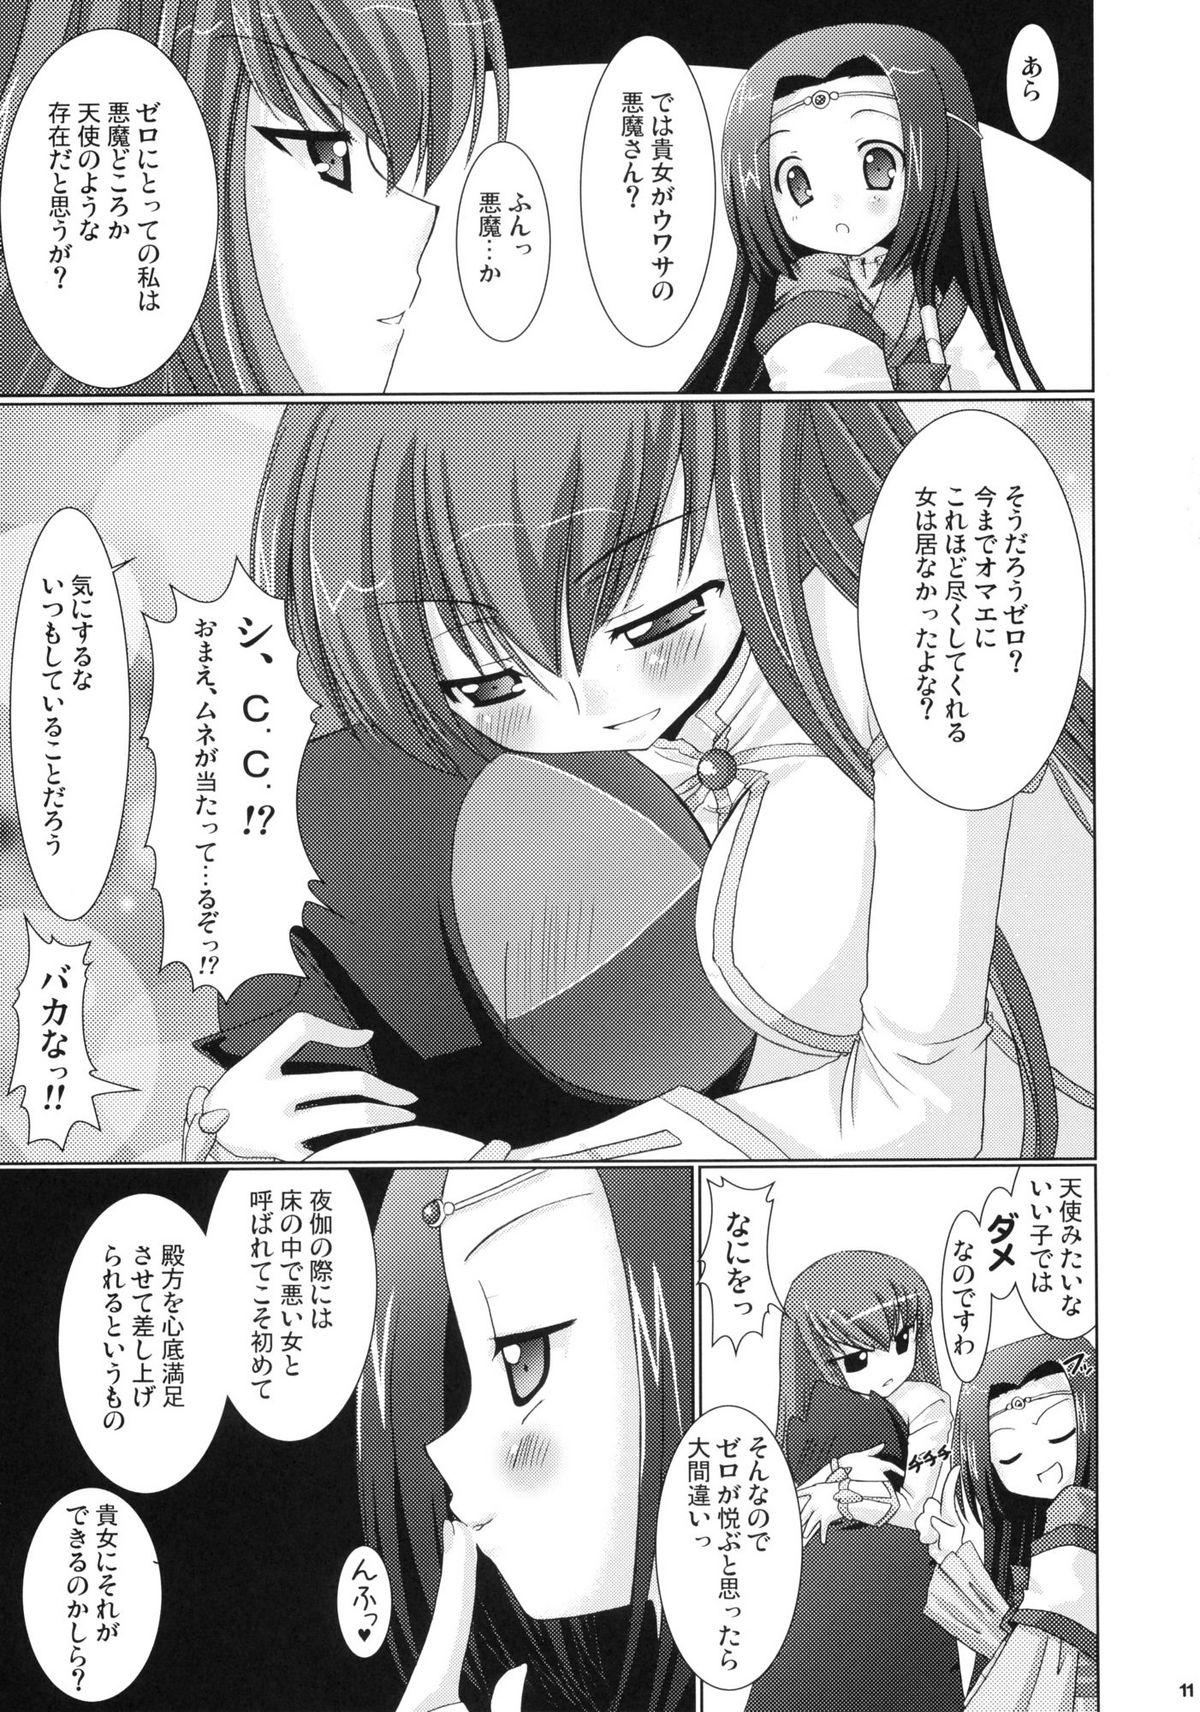 Boy Girl Kouhime Kyouhime - Code geass Compilation - Page 11